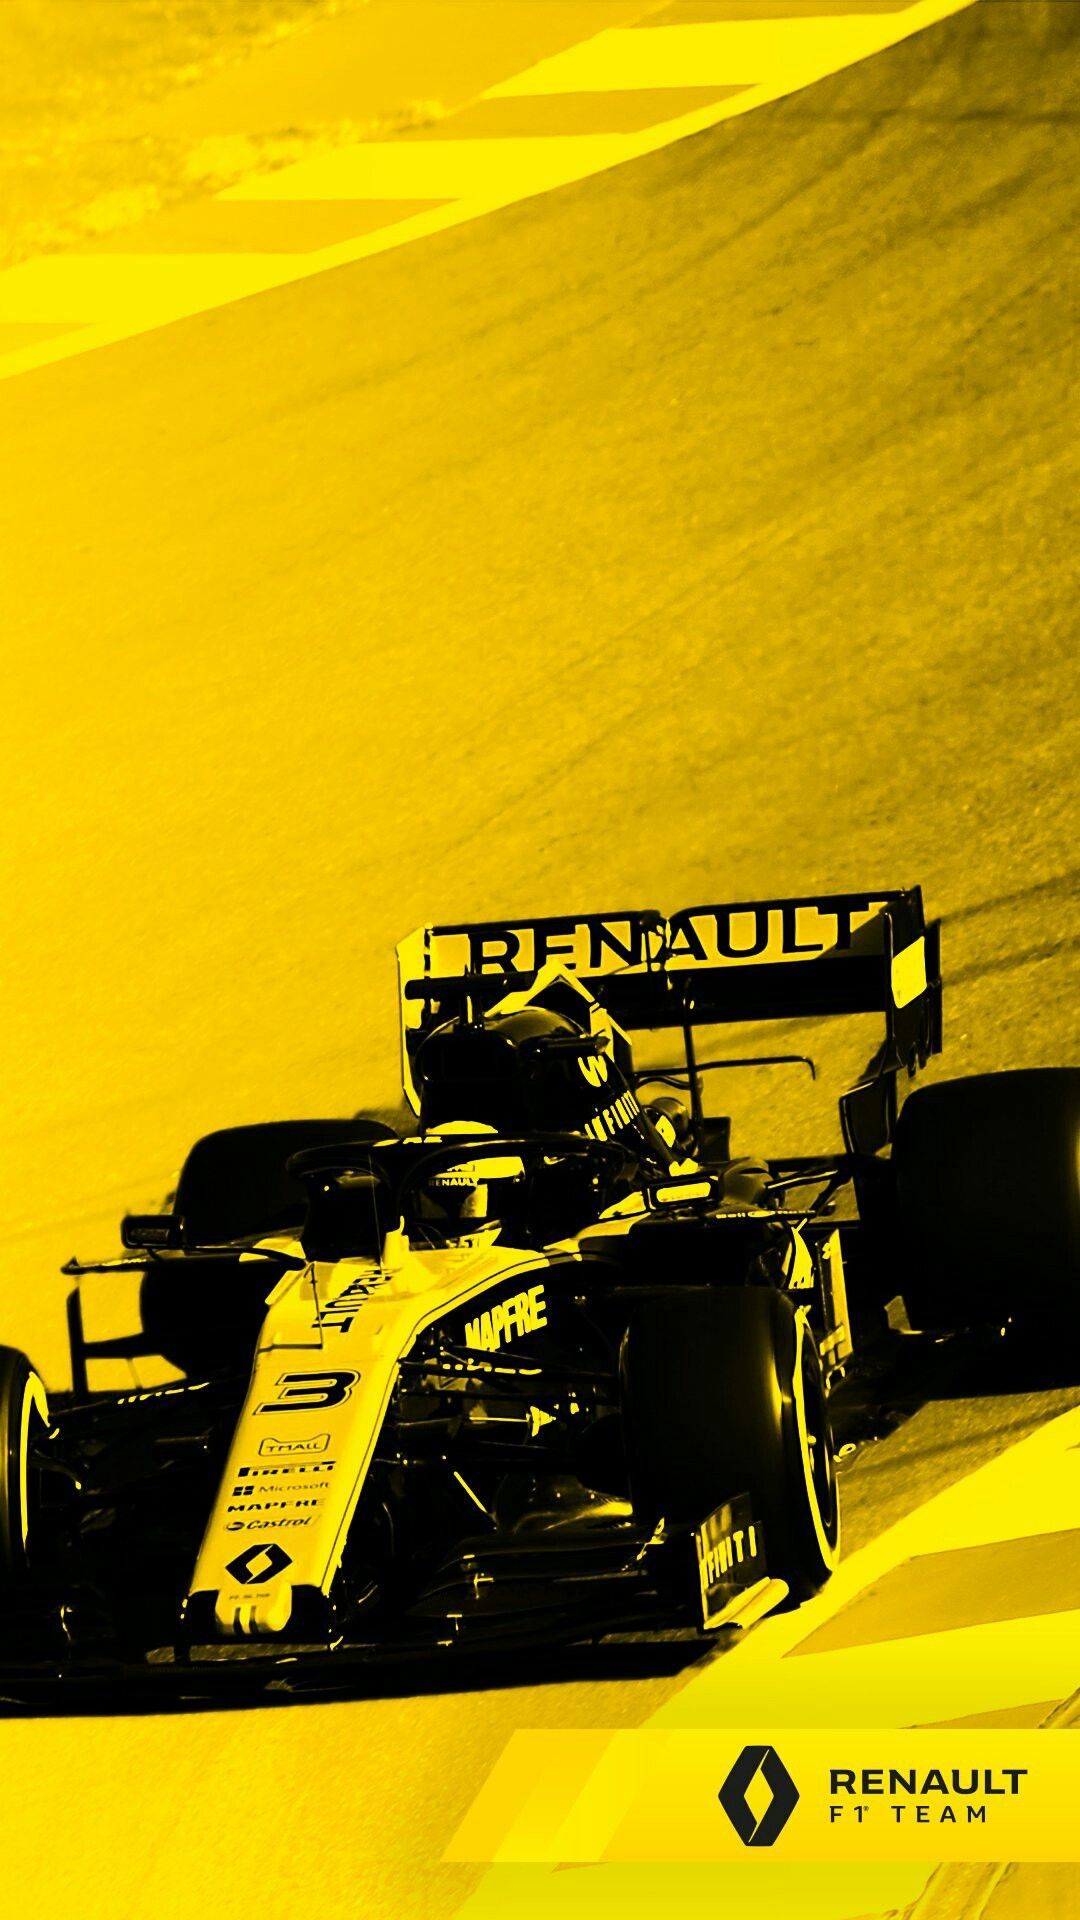 Renault F1 Team Wallpaper. Coches deportivos, Coches y